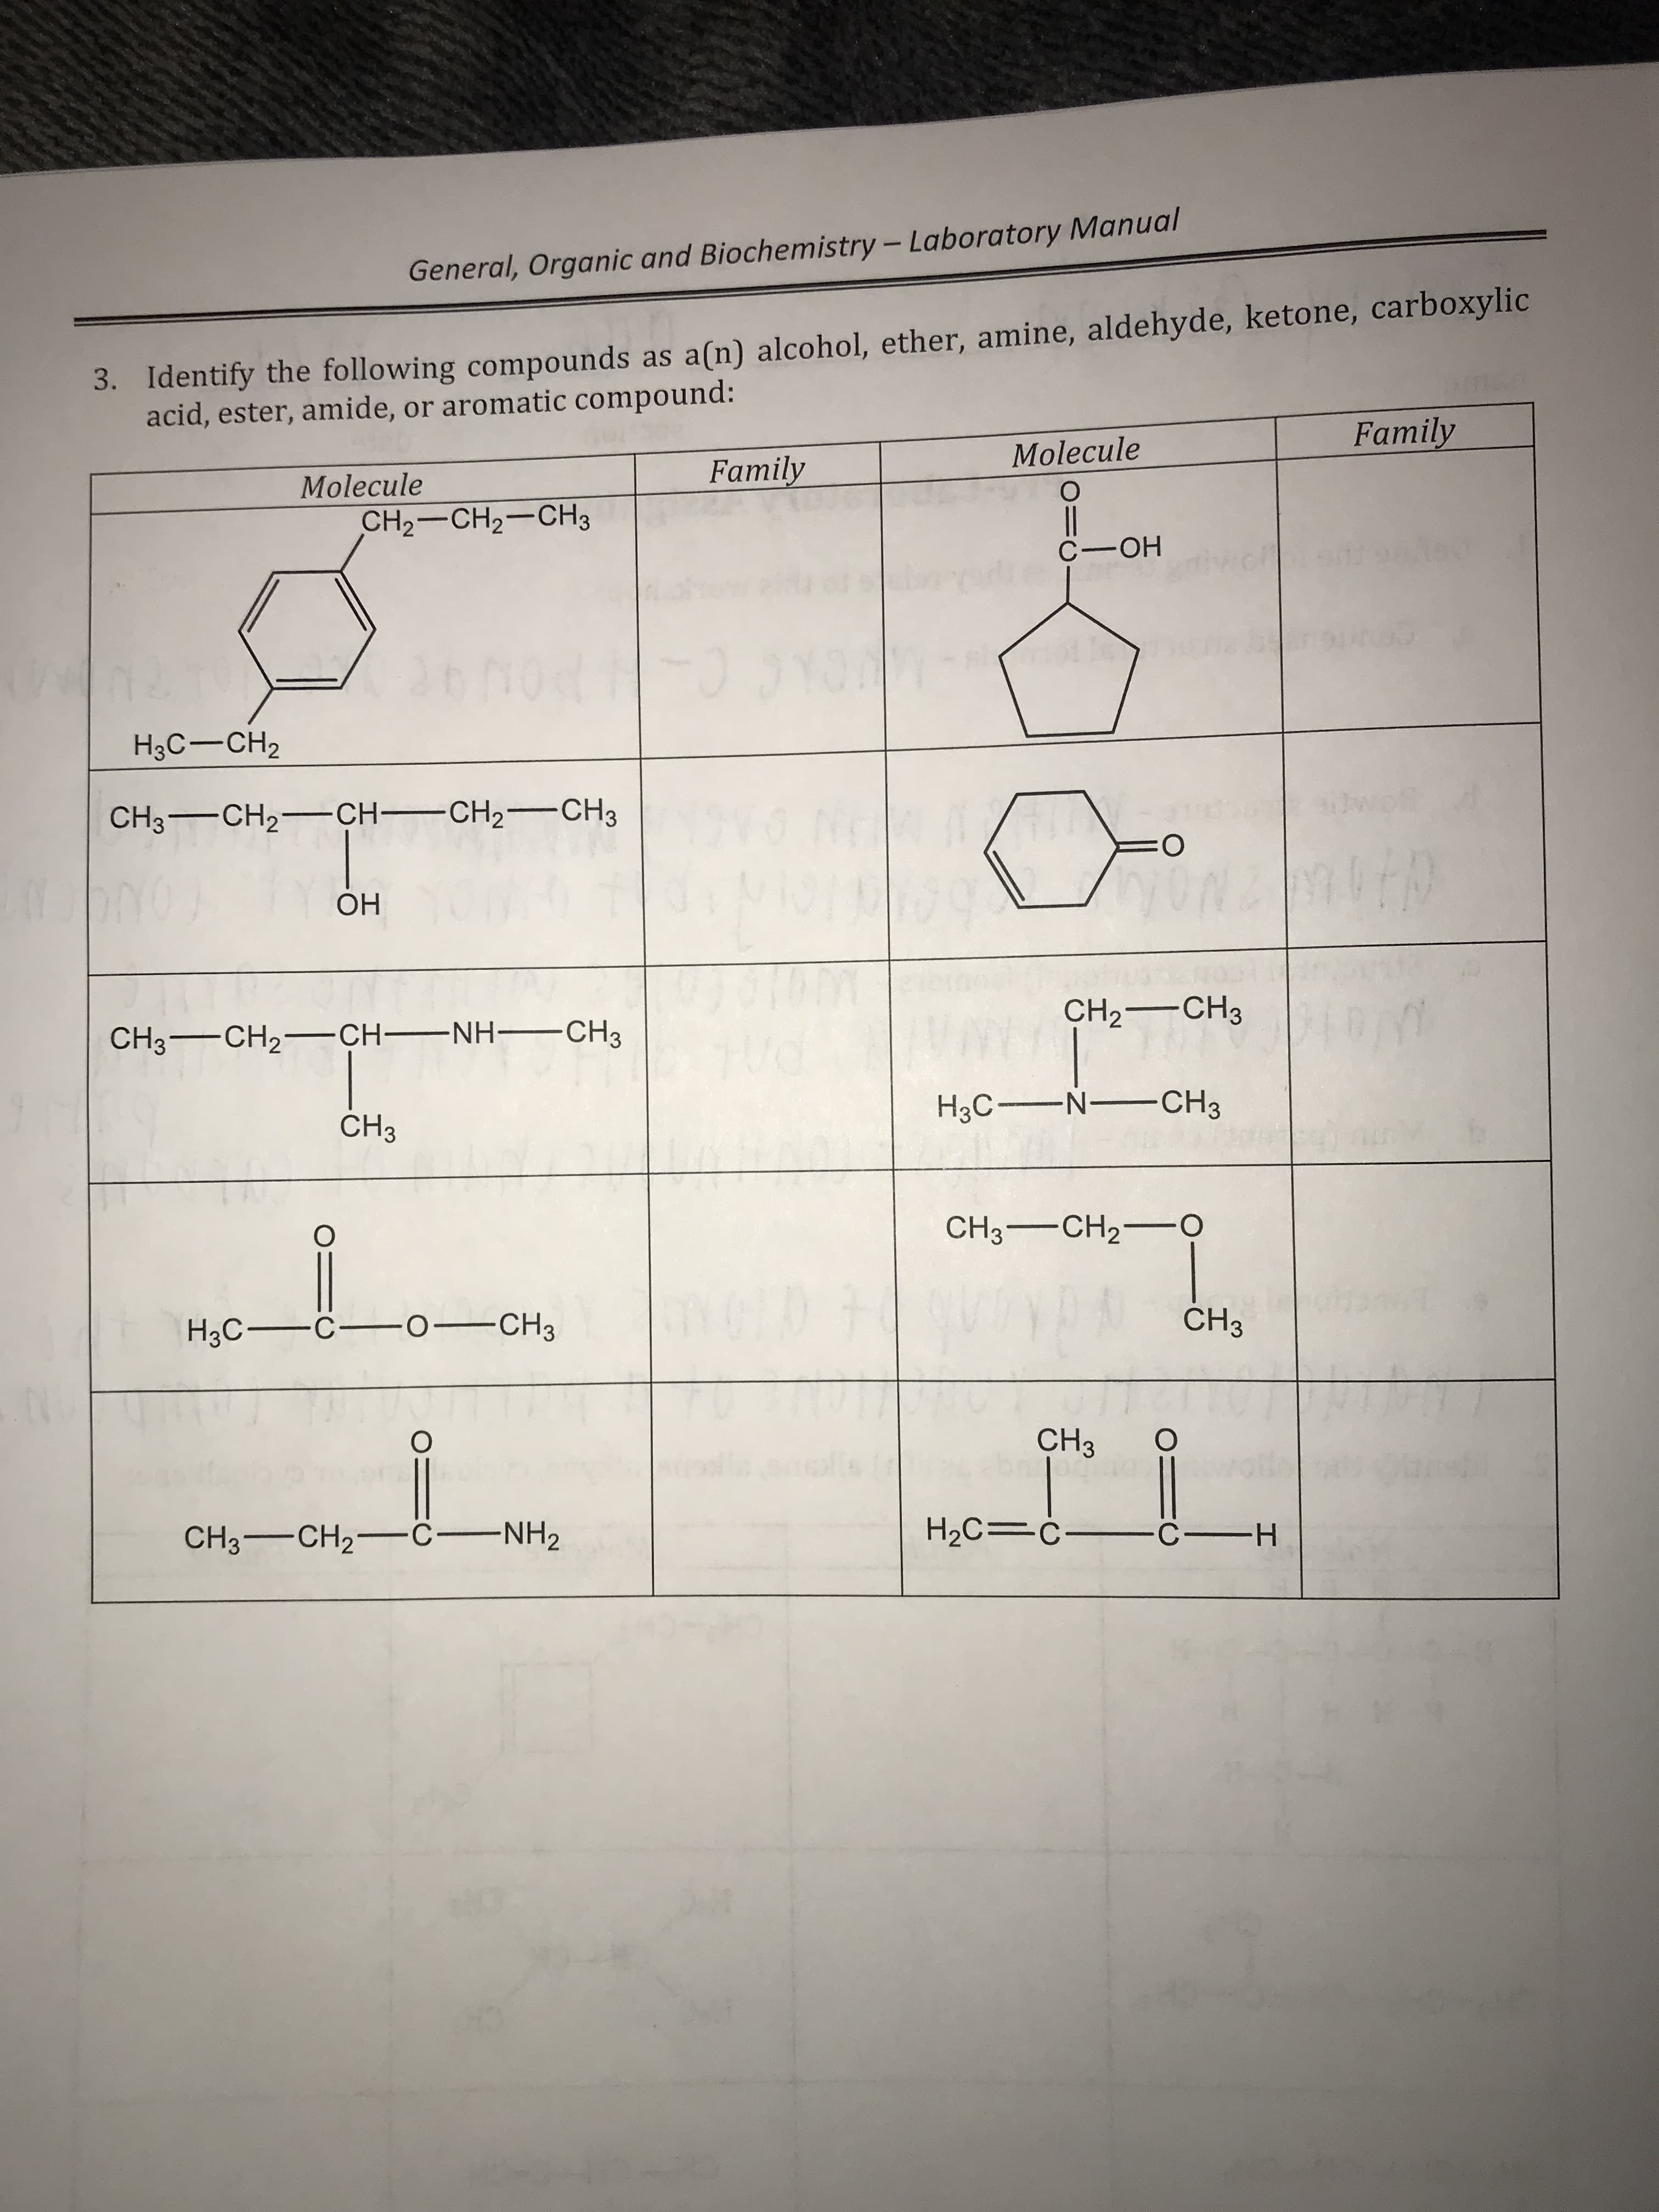 General, Organic and Biochem istry - Laboratory Manual
3. Identify the following compounds as a(n) alcohol, ether, amine, aldehyde, ketone, carboxylic
acid, ester, amide, or aromatic compound:
Family
Molecule
Family
Molecule
О
CHа—CH2—CHз
С —ОН
2 O
1 Io
107
Hас — сН2
CH3 CH2CH-CH2-- CH3
10 N
=O
VVNZMIED
ОН
CH2CH3
Om
CH3 CH2-CH-NH CH3
H3C N CH3
CH3
CH3CH2 o
0410
H3C-C O CH3
CH3
о
CH3
CH3 CH2 CNH2
H2C C CH
